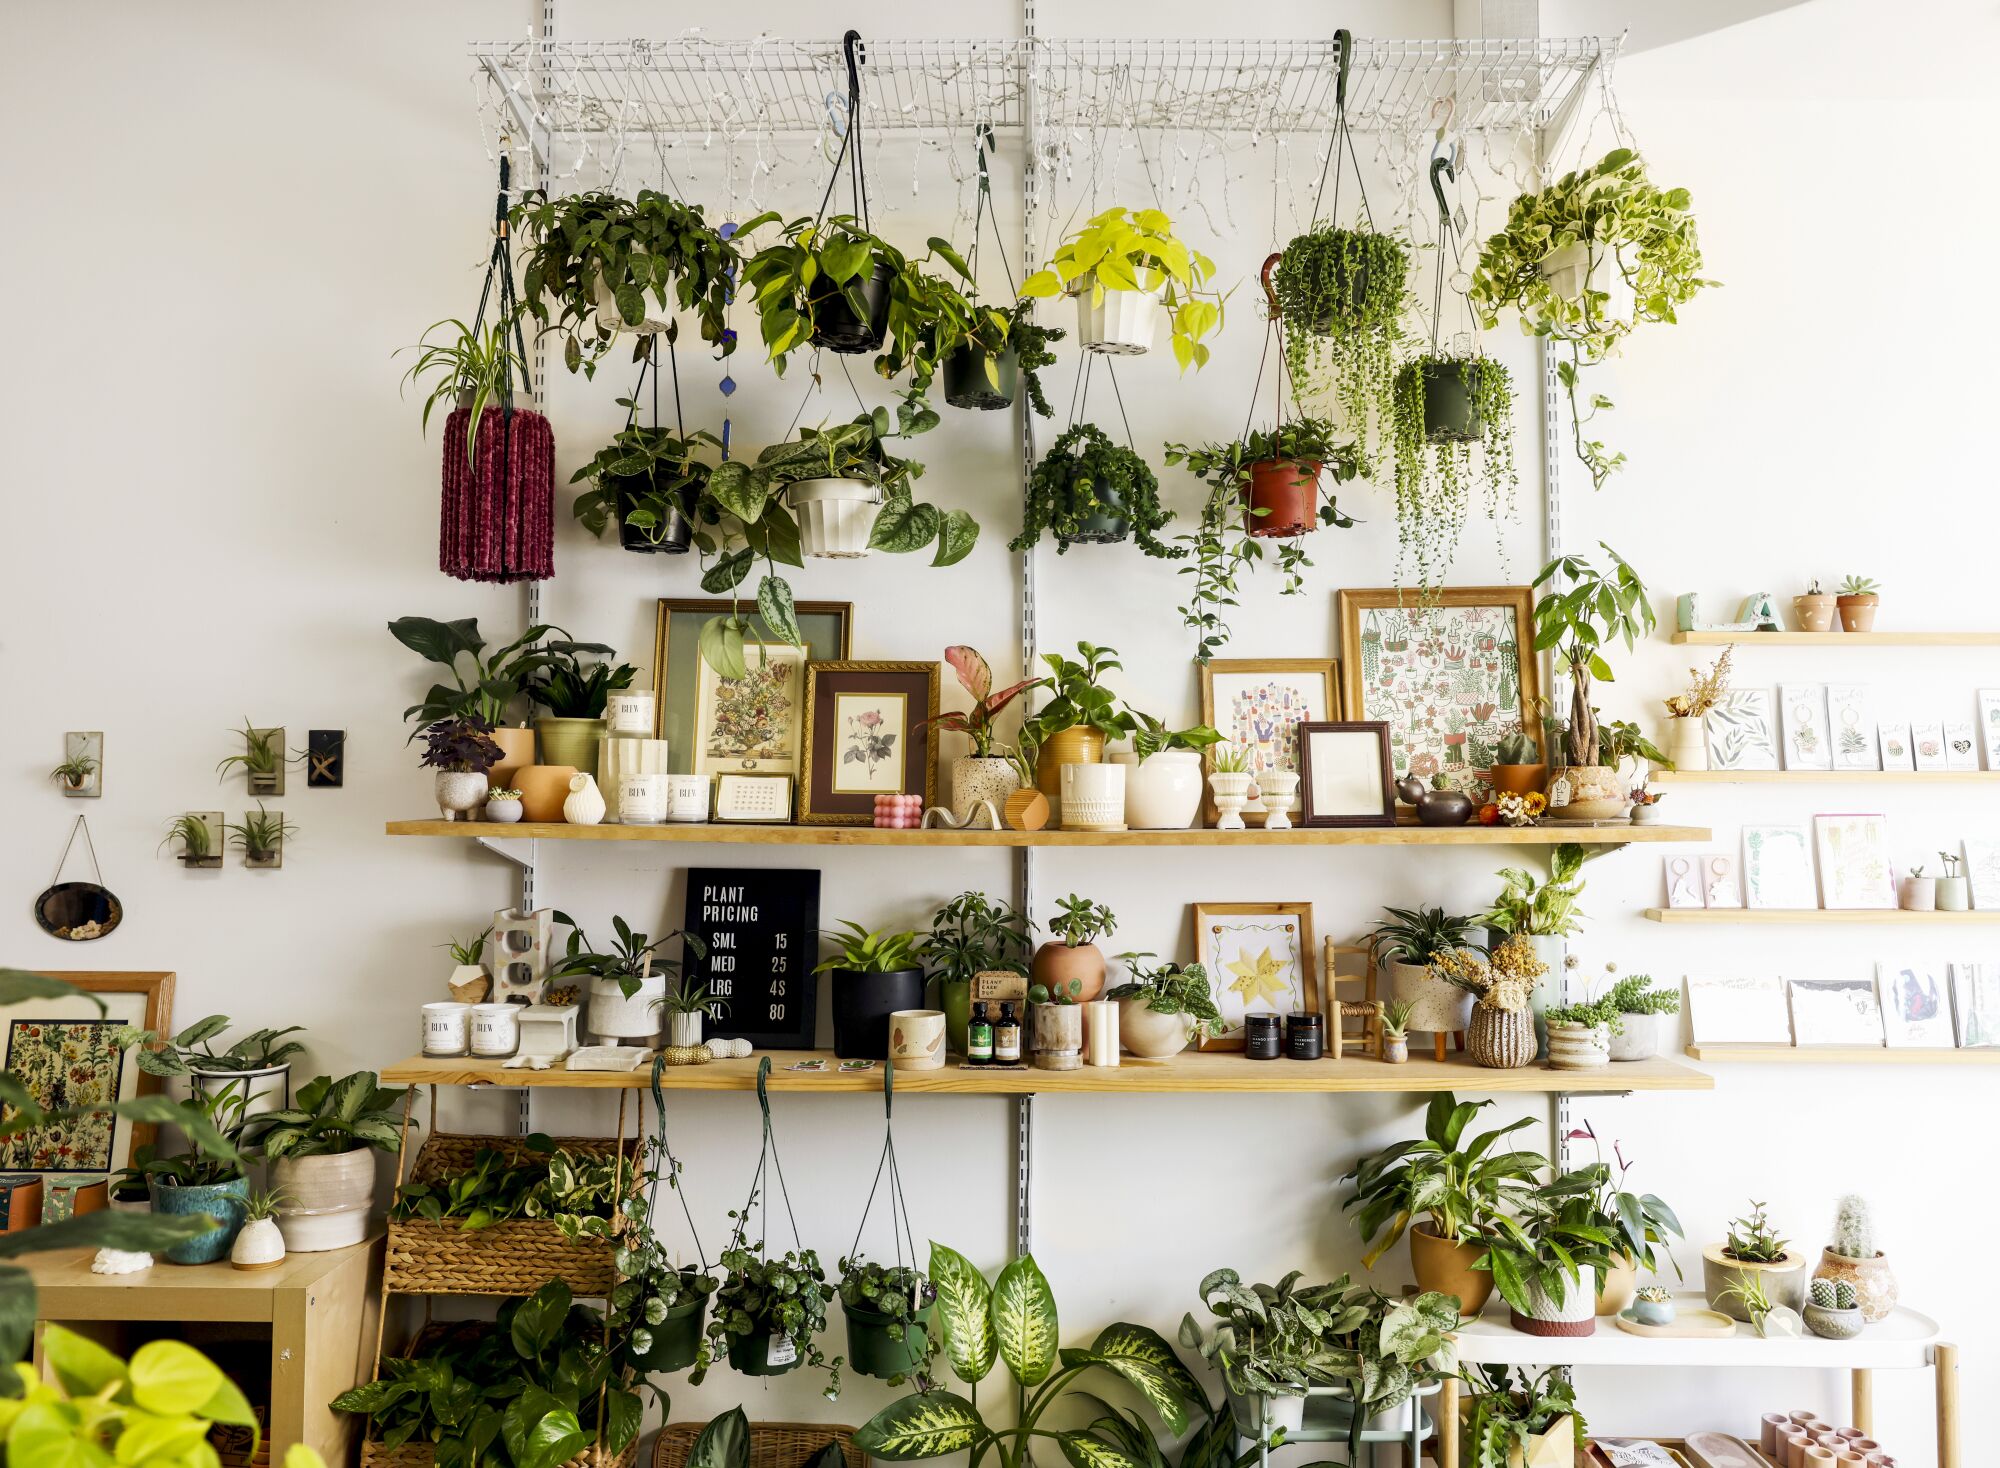 Plants, ceramics and gifts on shelves 